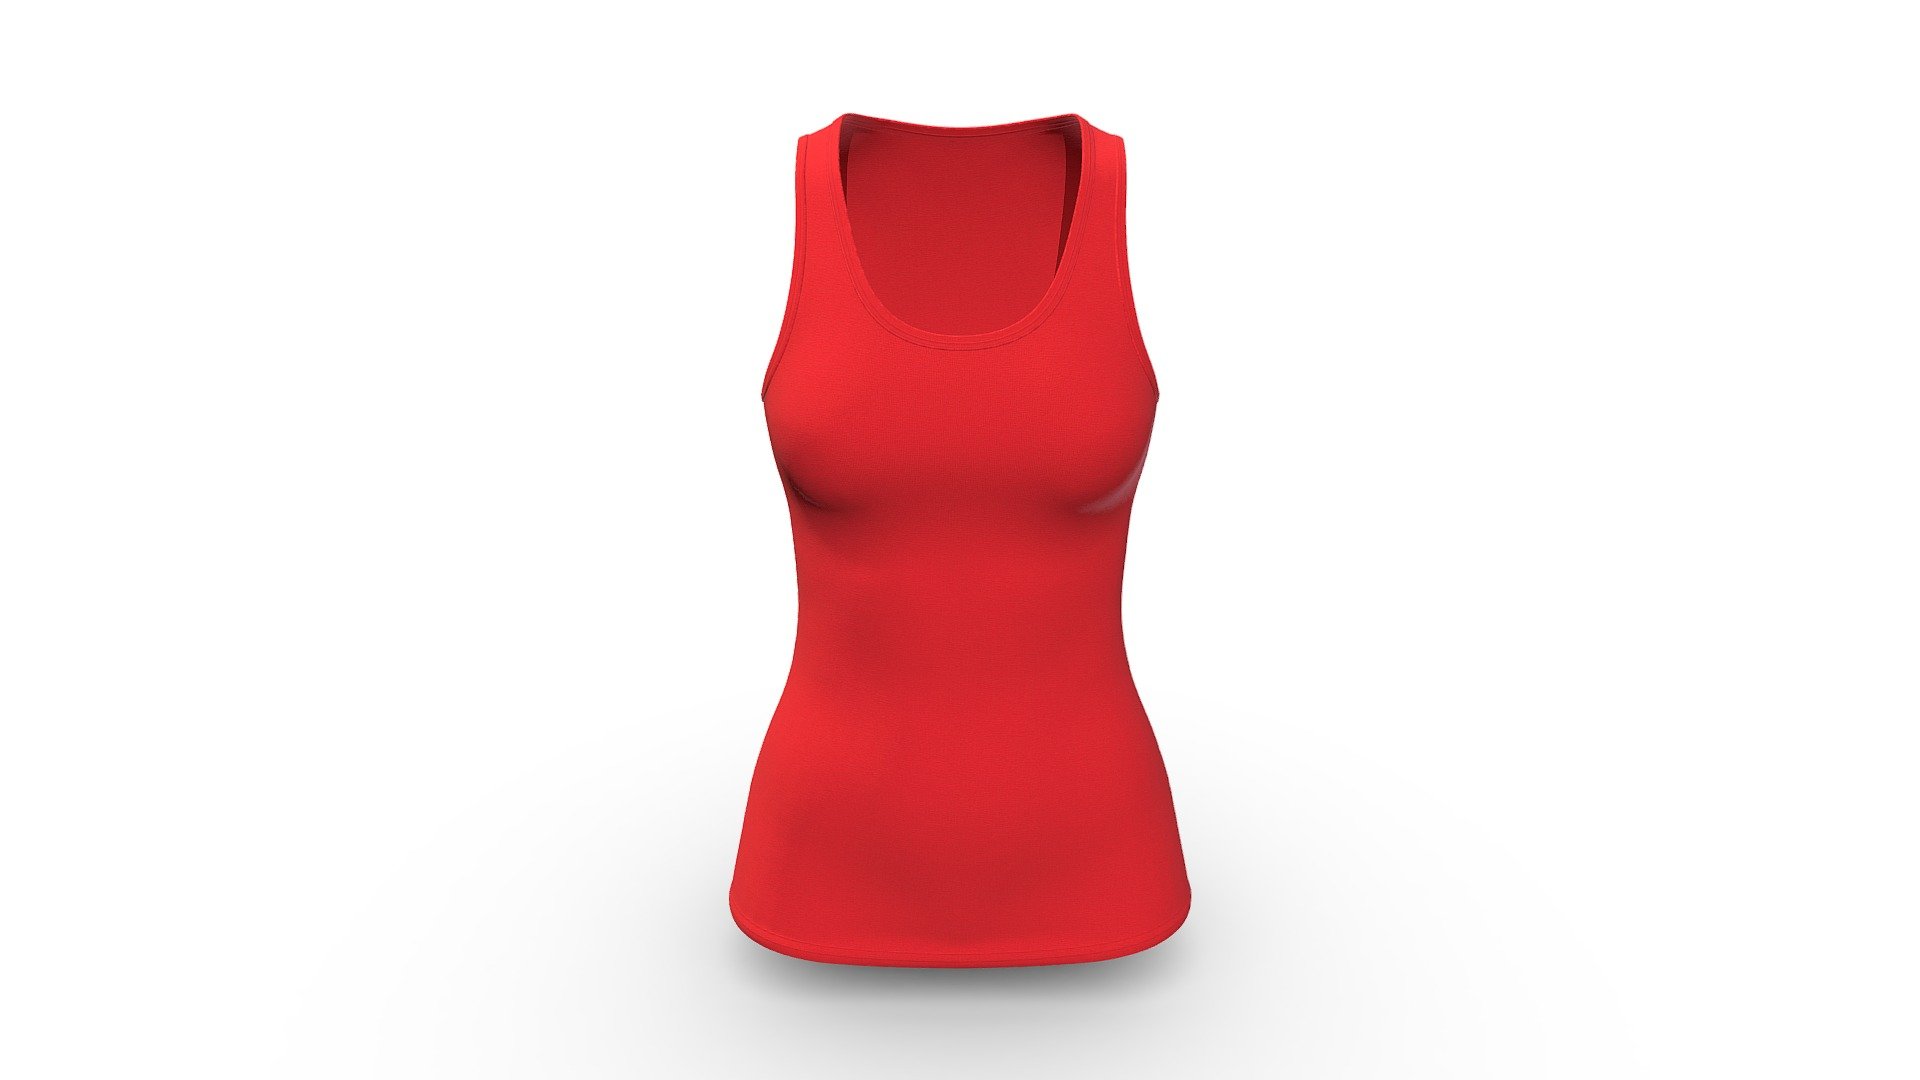 Cloth Title = Women Sport Top Women Workout Tank Top 

SKU = DG100213 
 
Category = Women 

Product Type = Tank Top 

Cloth Length = Regular 

Body Fit = Fitted 

Occasion = Activewear 


Our Services:

3D Apparel Design.

OBJ,FBX,GLTF Making with High/Low Poly.

Fabric Digitalization.

Mockup making.

3D Teck Pack.

Pattern Making.

2D Illustration.

Cloth Animation and 360 Spin Video.


Contact us:- 

Email: info@digitalfashionwear.com 

Website: https://digitalfashionwear.com 


We designed all the types of cloth specially focused on product visualization, e-commerce, fitting, and production. 

We will design: 

T-shirts 

Polo shirts 

Hoodies 

Sweatshirt 

Jackets 

Shirts 

TankTops 

Trousers 

Bras 

Underwear 

Blazer 

Aprons 

Leggings 

and All Fashion items. 





Our goal is to make sure what we provide you, meets your demand 3d model